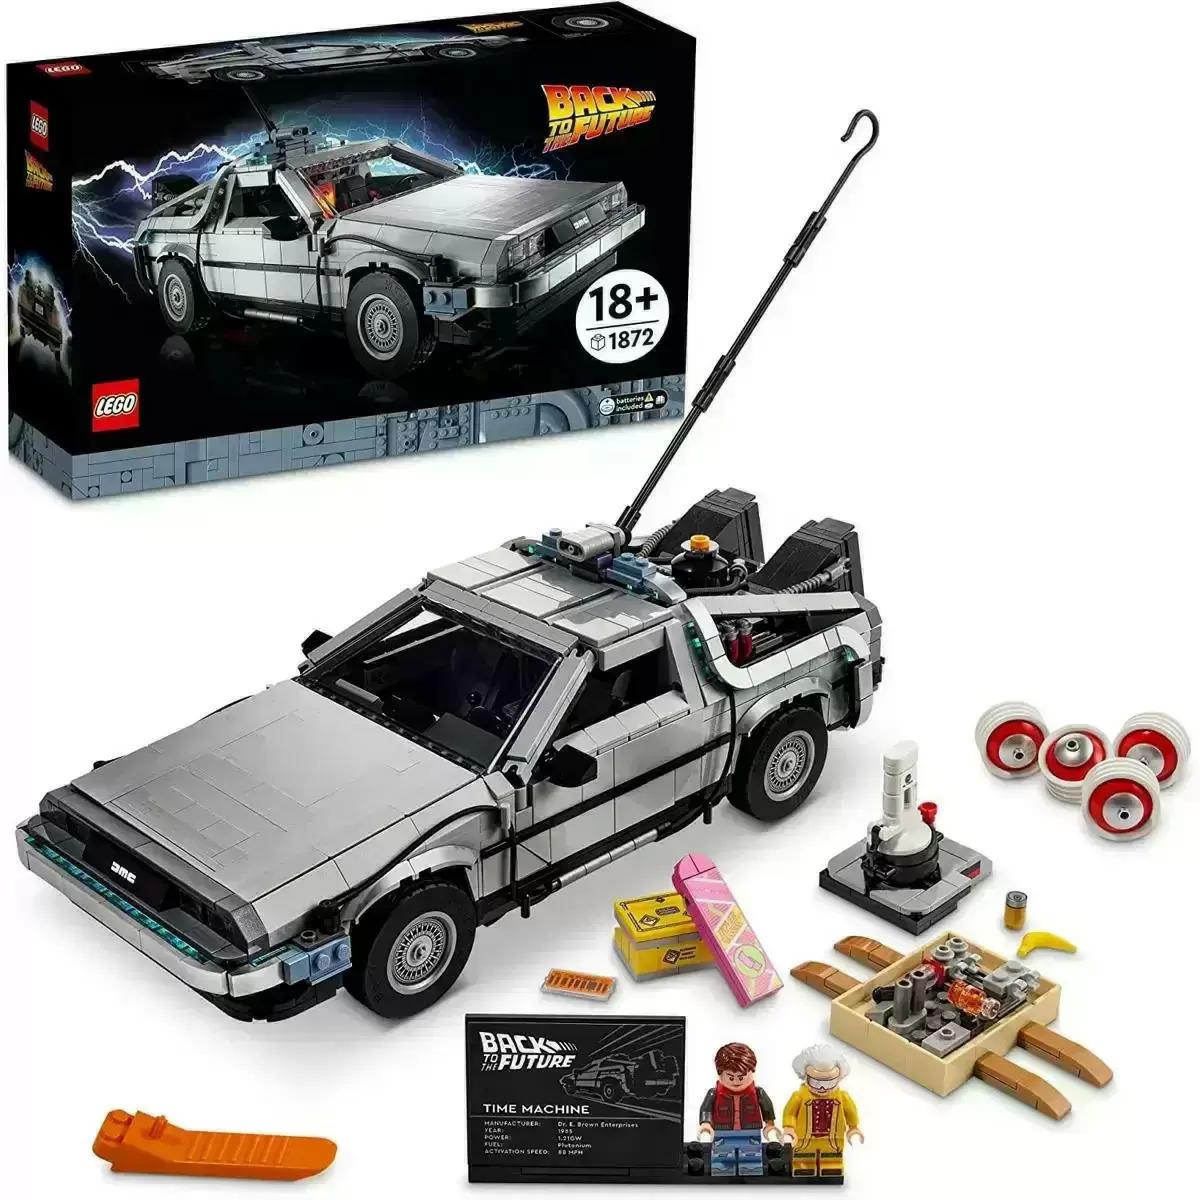 LEGO Back to The Future Time Machine Building Set 10300 for $159.99 Shipped